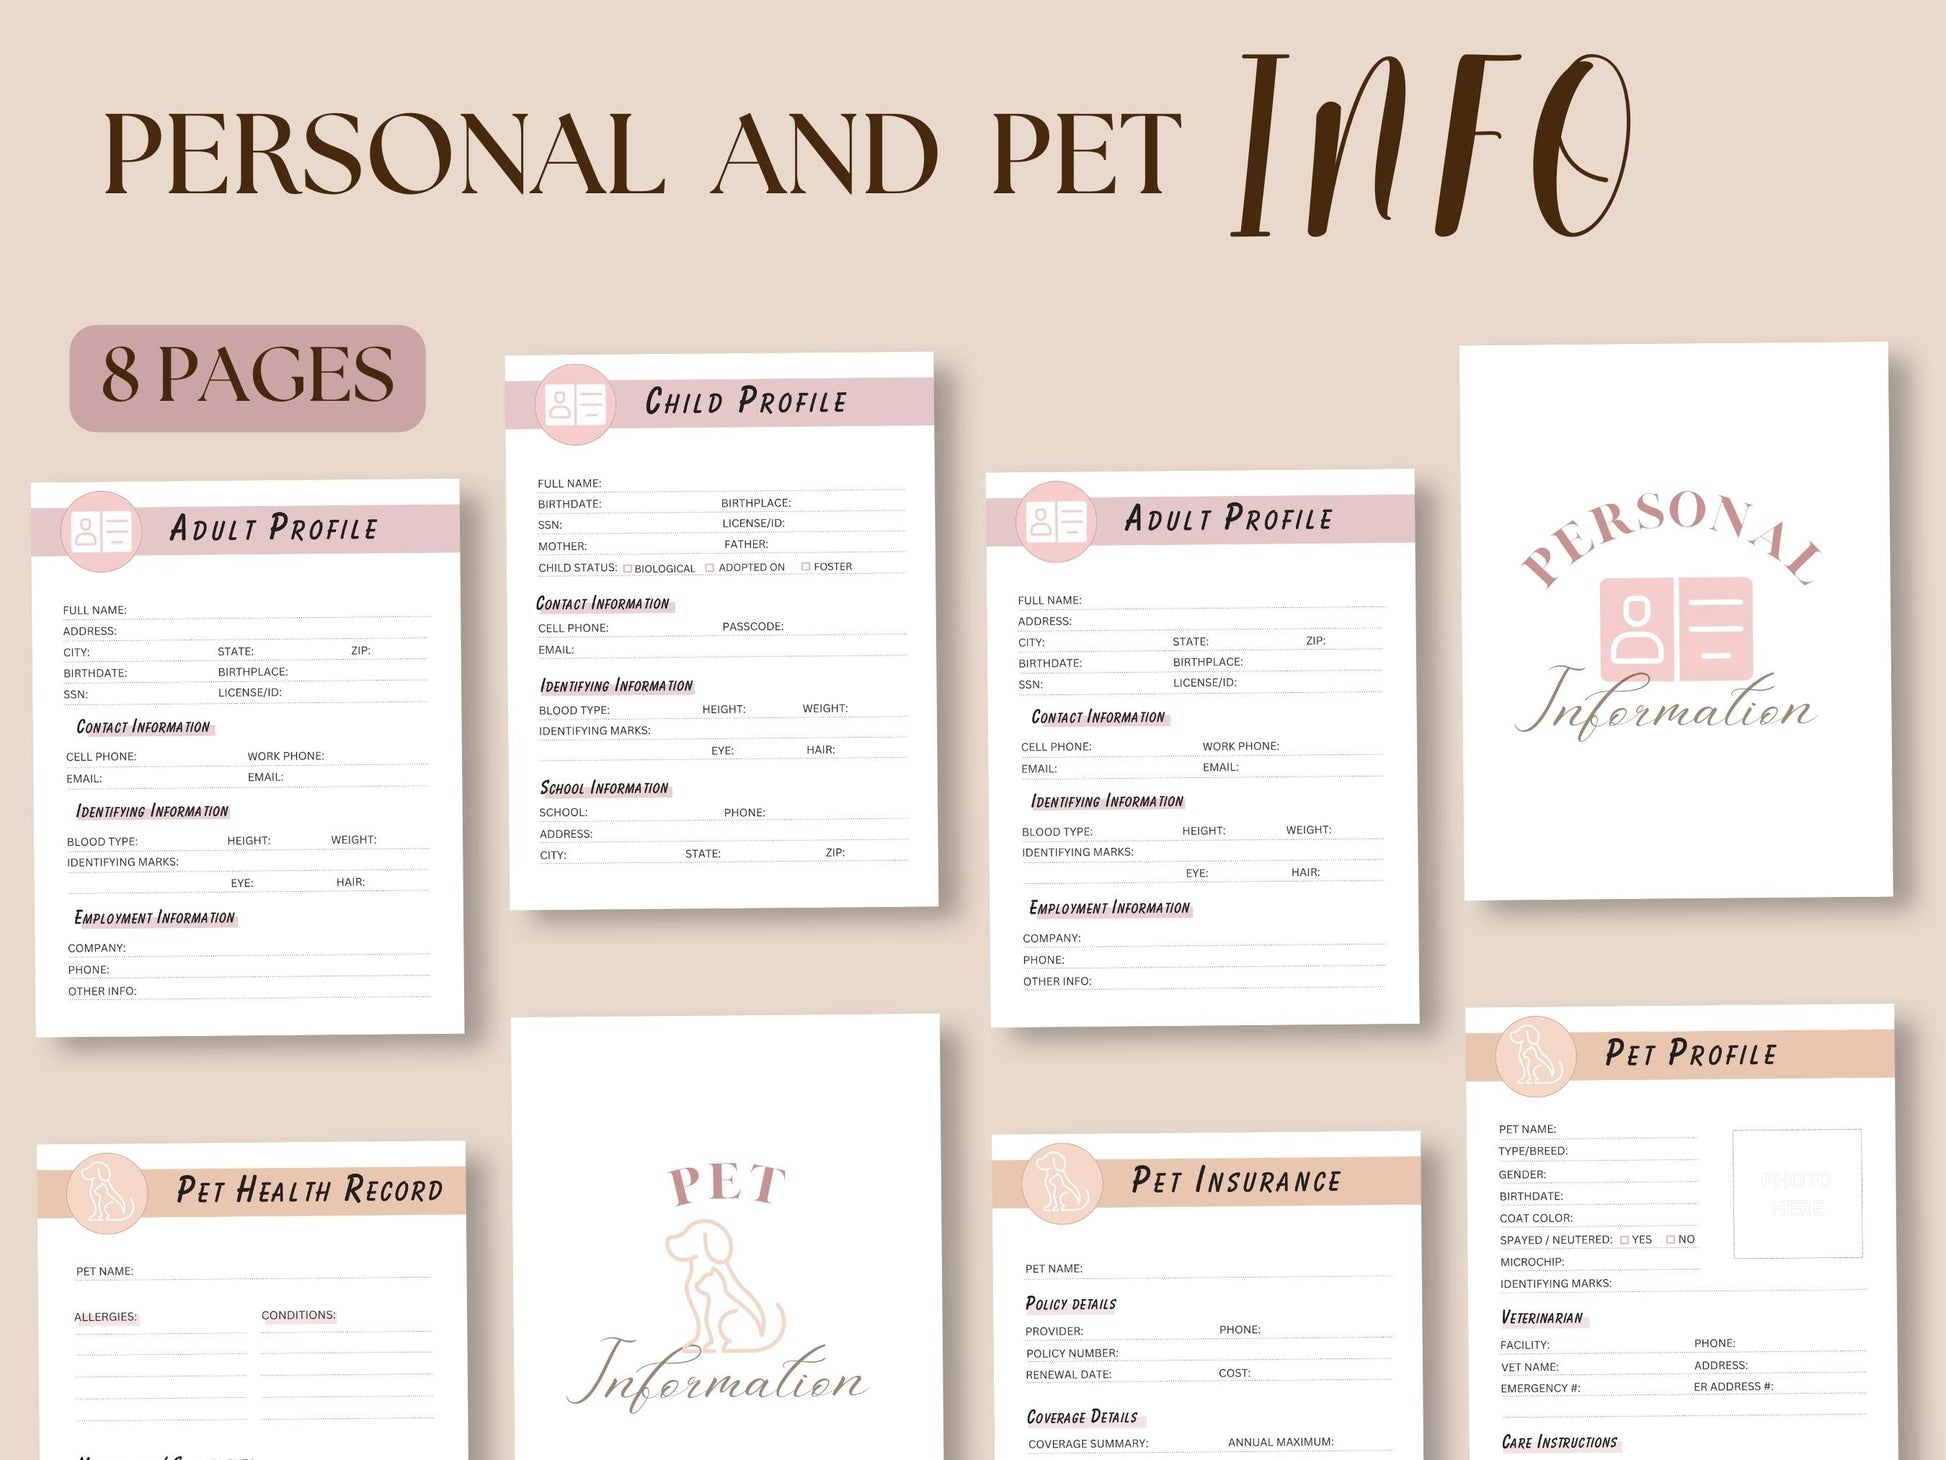 Example pages, Personal and Pet info overview, In case of emergency binder